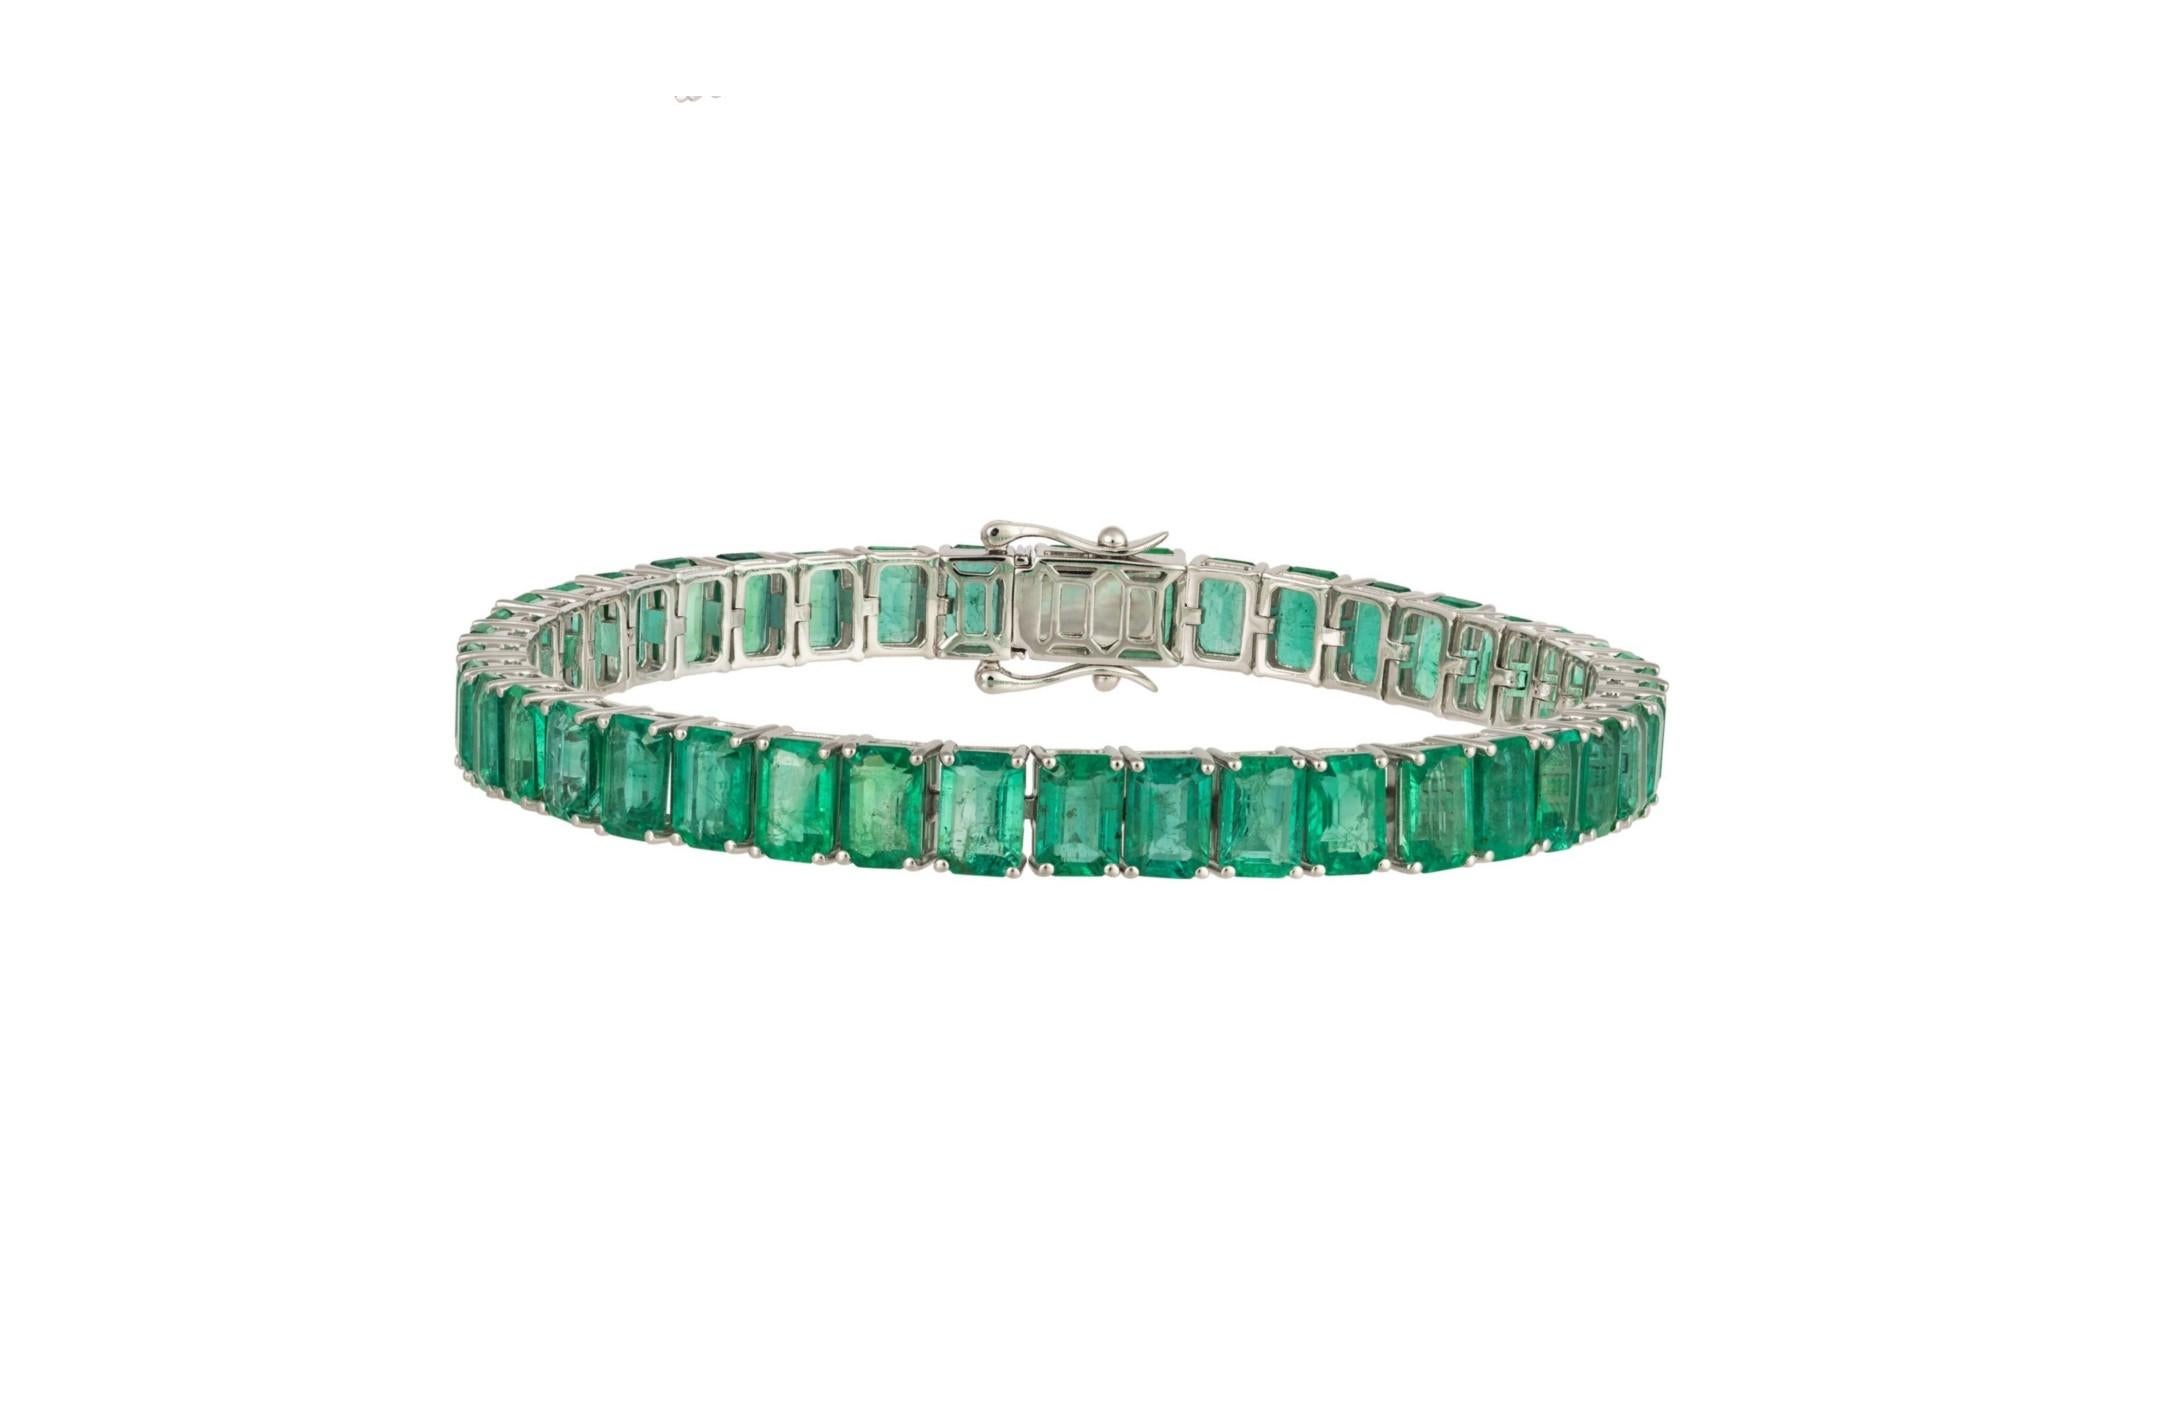 The Following Item we are offering is this Rare Important Radiant 18KT Gold Gorgeous Glittering and Sparkling Magnificent Fancy Emerald Cut Emerald Tennis Bracelet. Bracelet Contains approx 24CTS of Beautiful Fancy Green Emerald Cut Emeralds set in